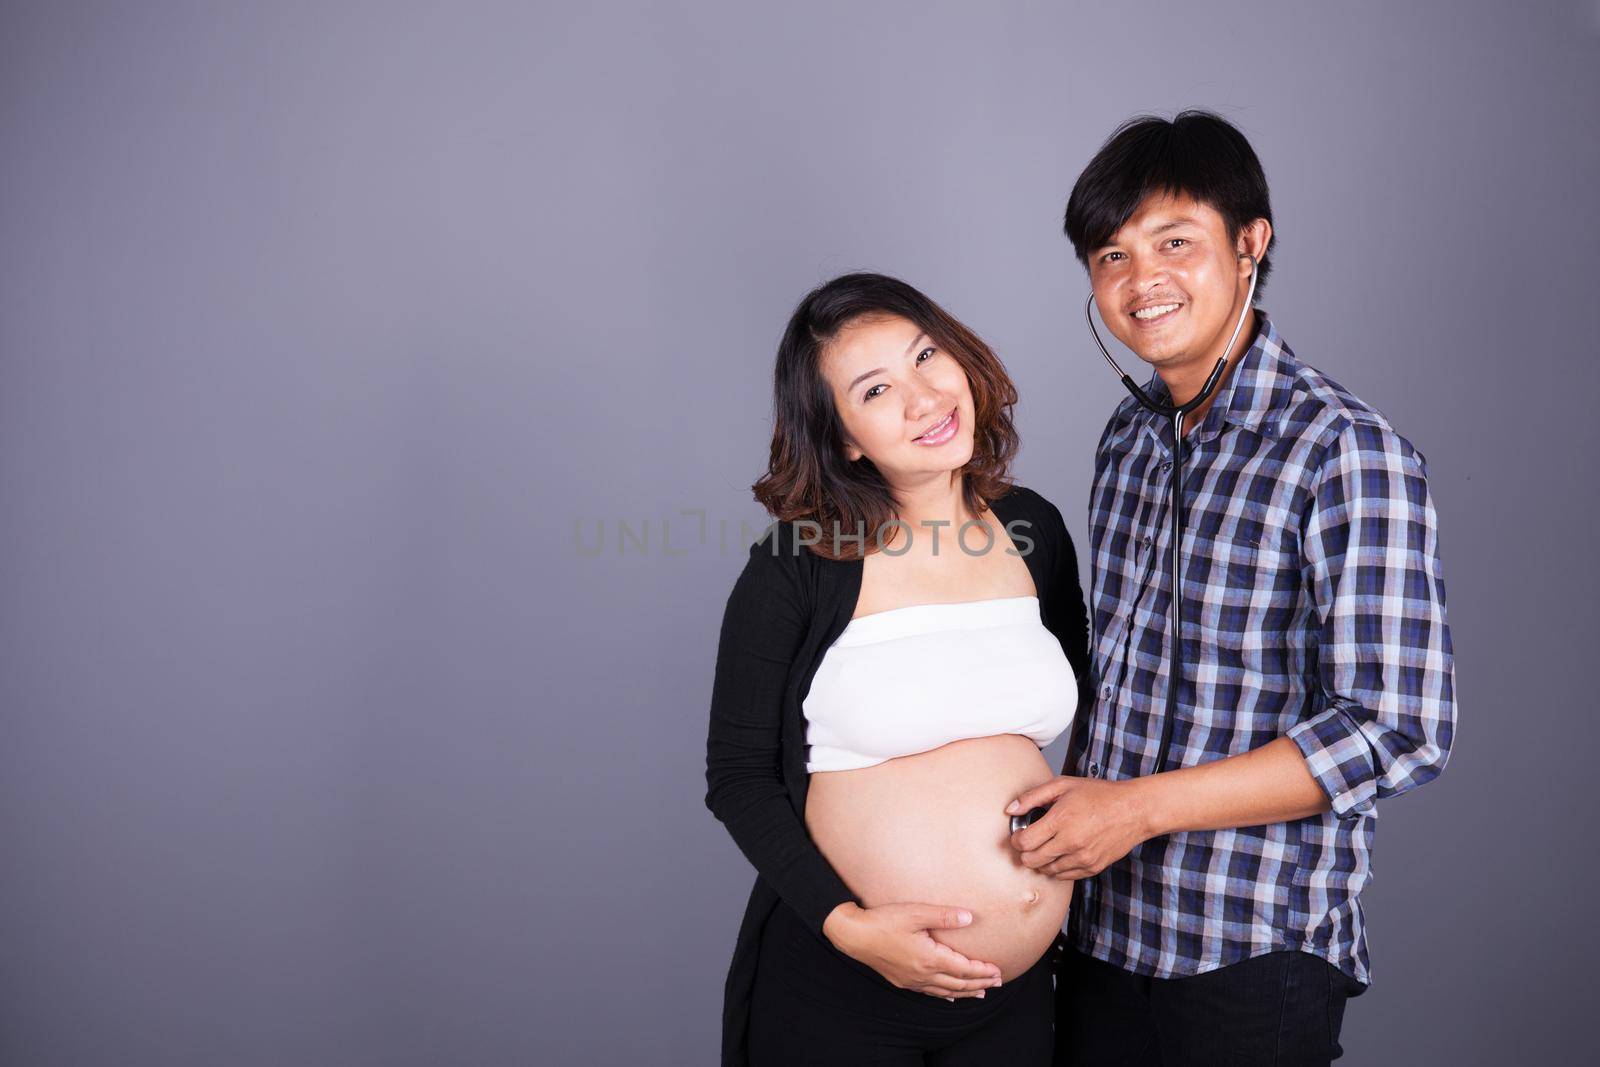 man listening the belly of his pregnant wife with stethoscope on gray wall background

stethoscope